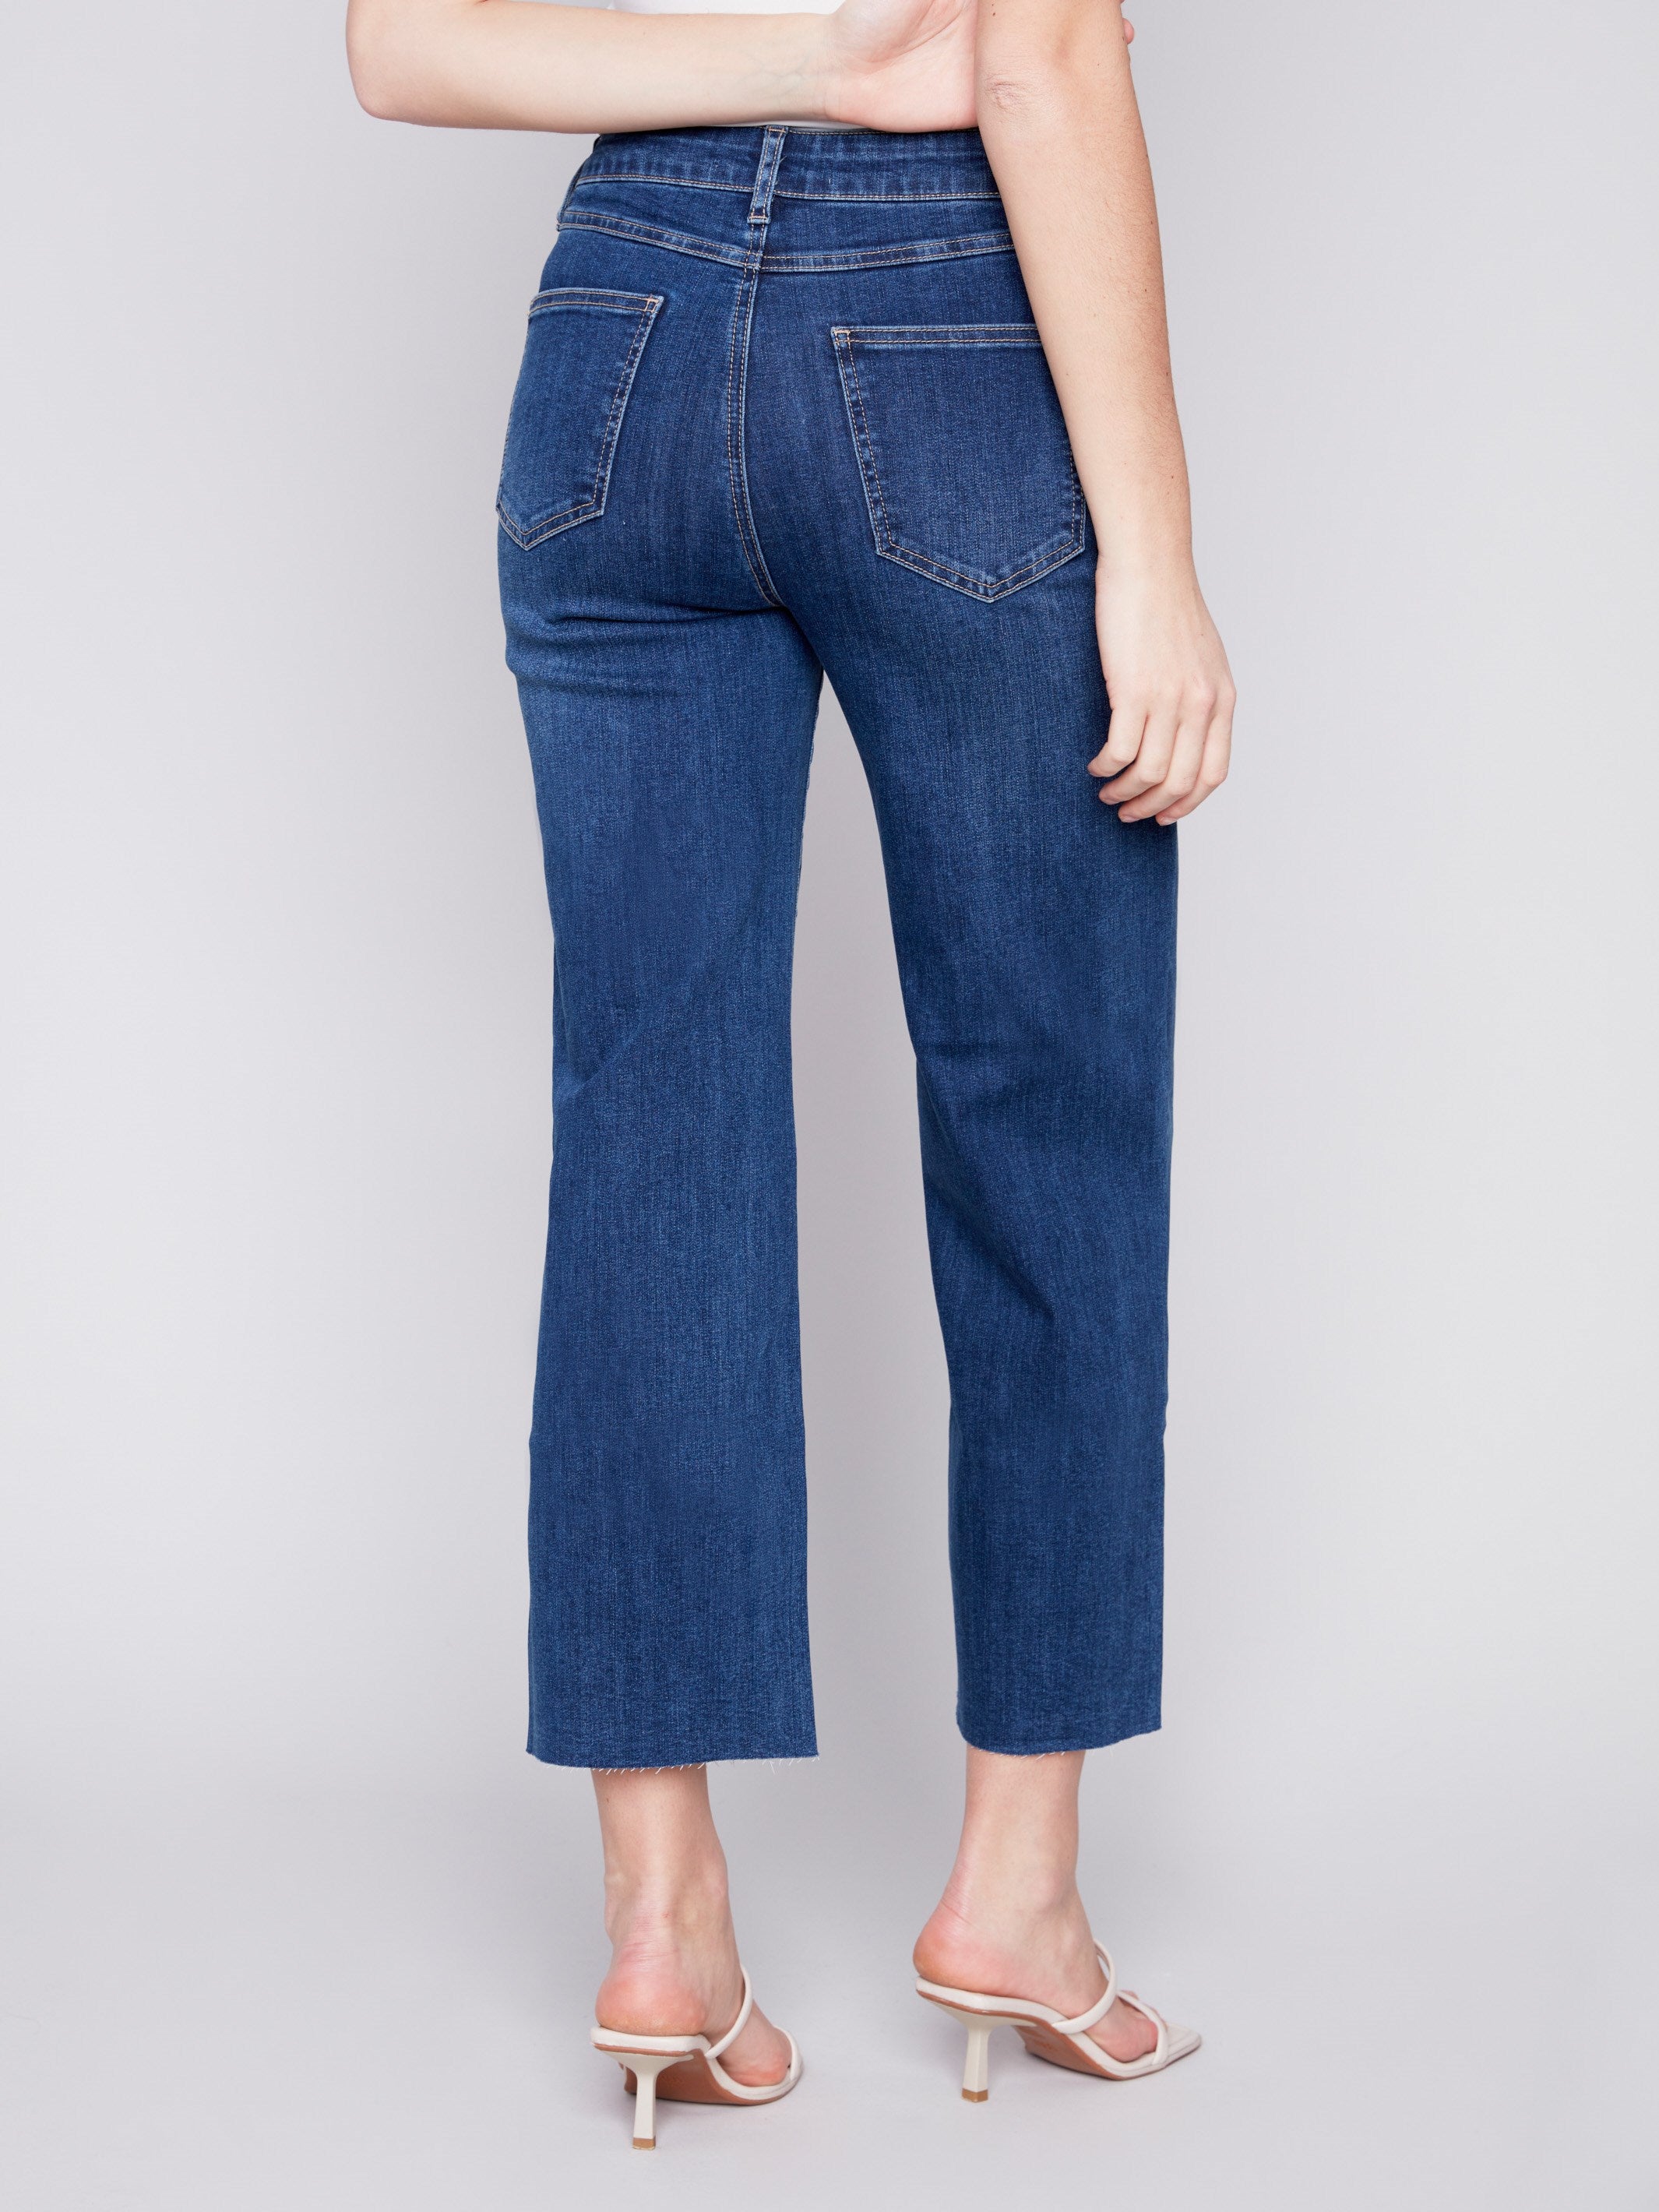 Flared Jeans with Raw Edge - Indigo - Charlie B Collection Canada - Image 6